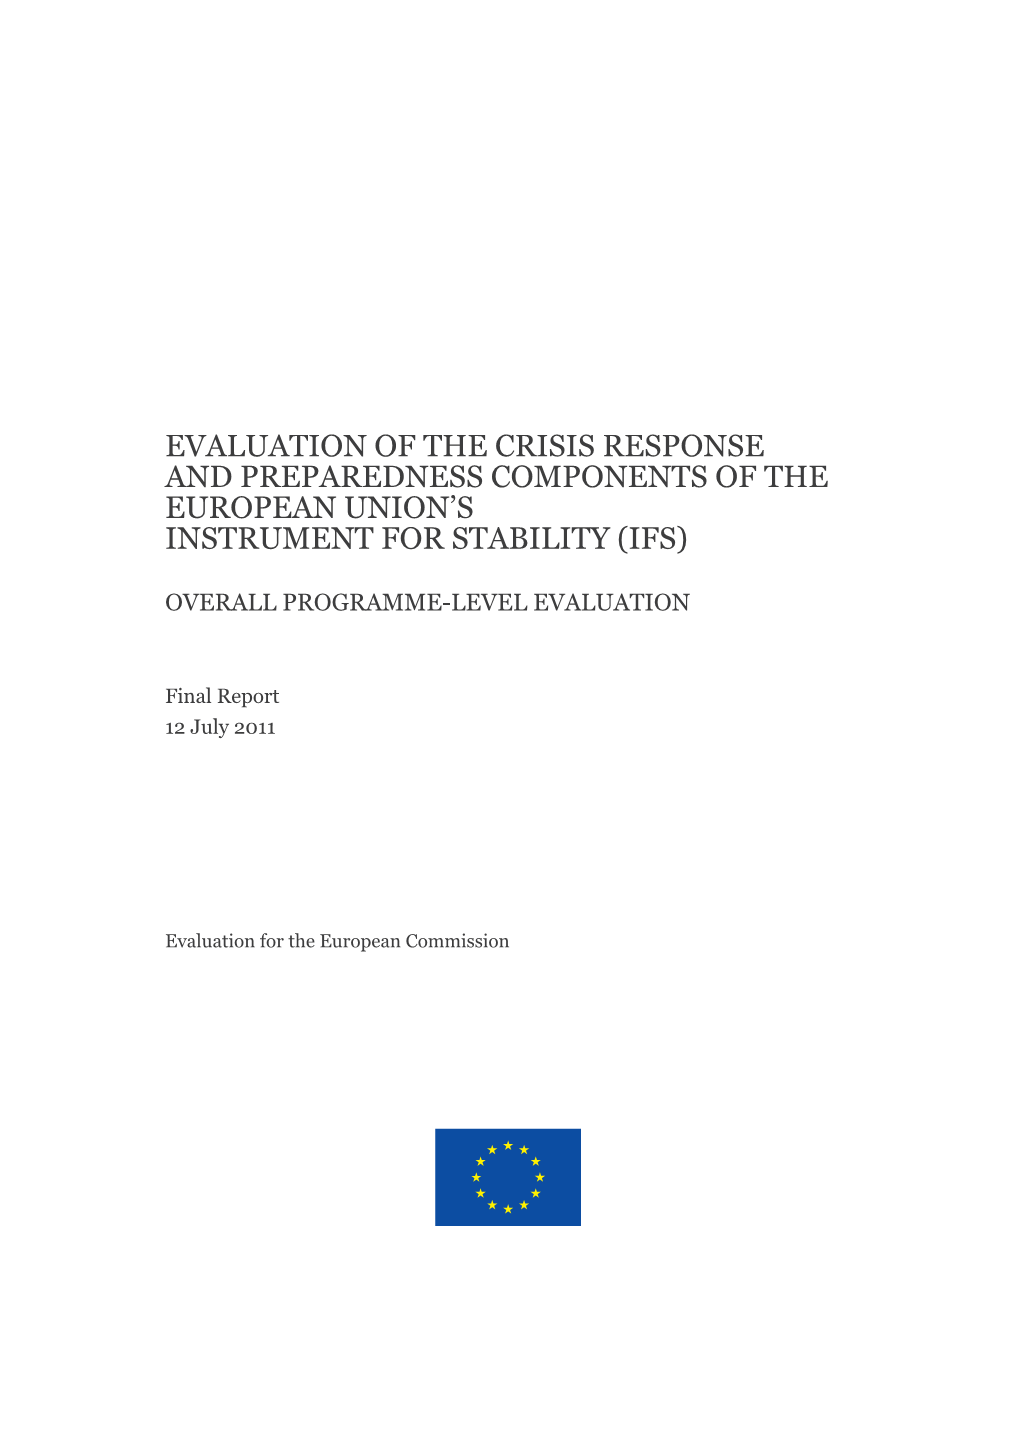 Evaluation of the Crisis Response and Preparedness Components of the European Union's Instrument for Stability (Ifs)